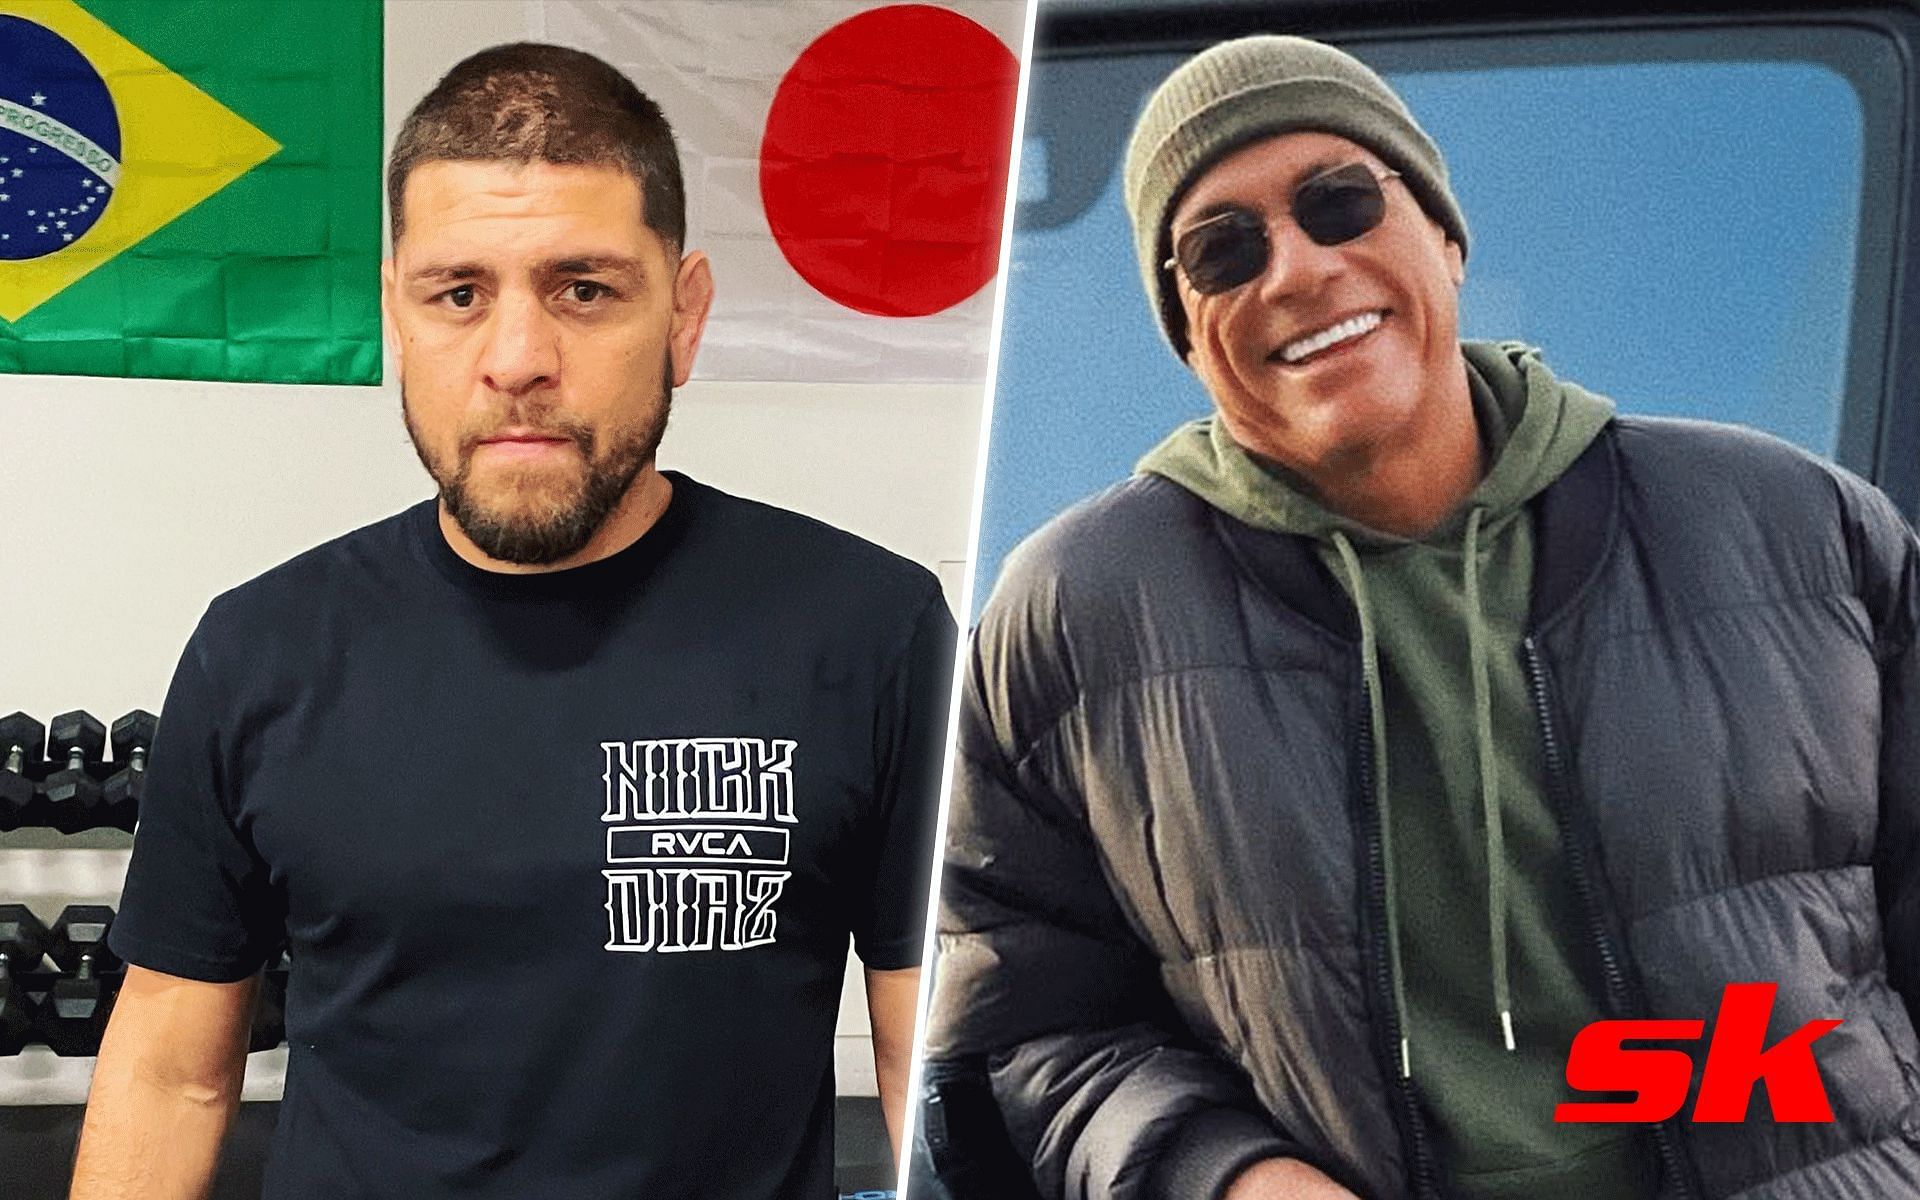 Nick Diaz (Left) and Jean Claude Van Damme (Right) [Images via: @nickdiaz209 and @jcvd on Instagram]